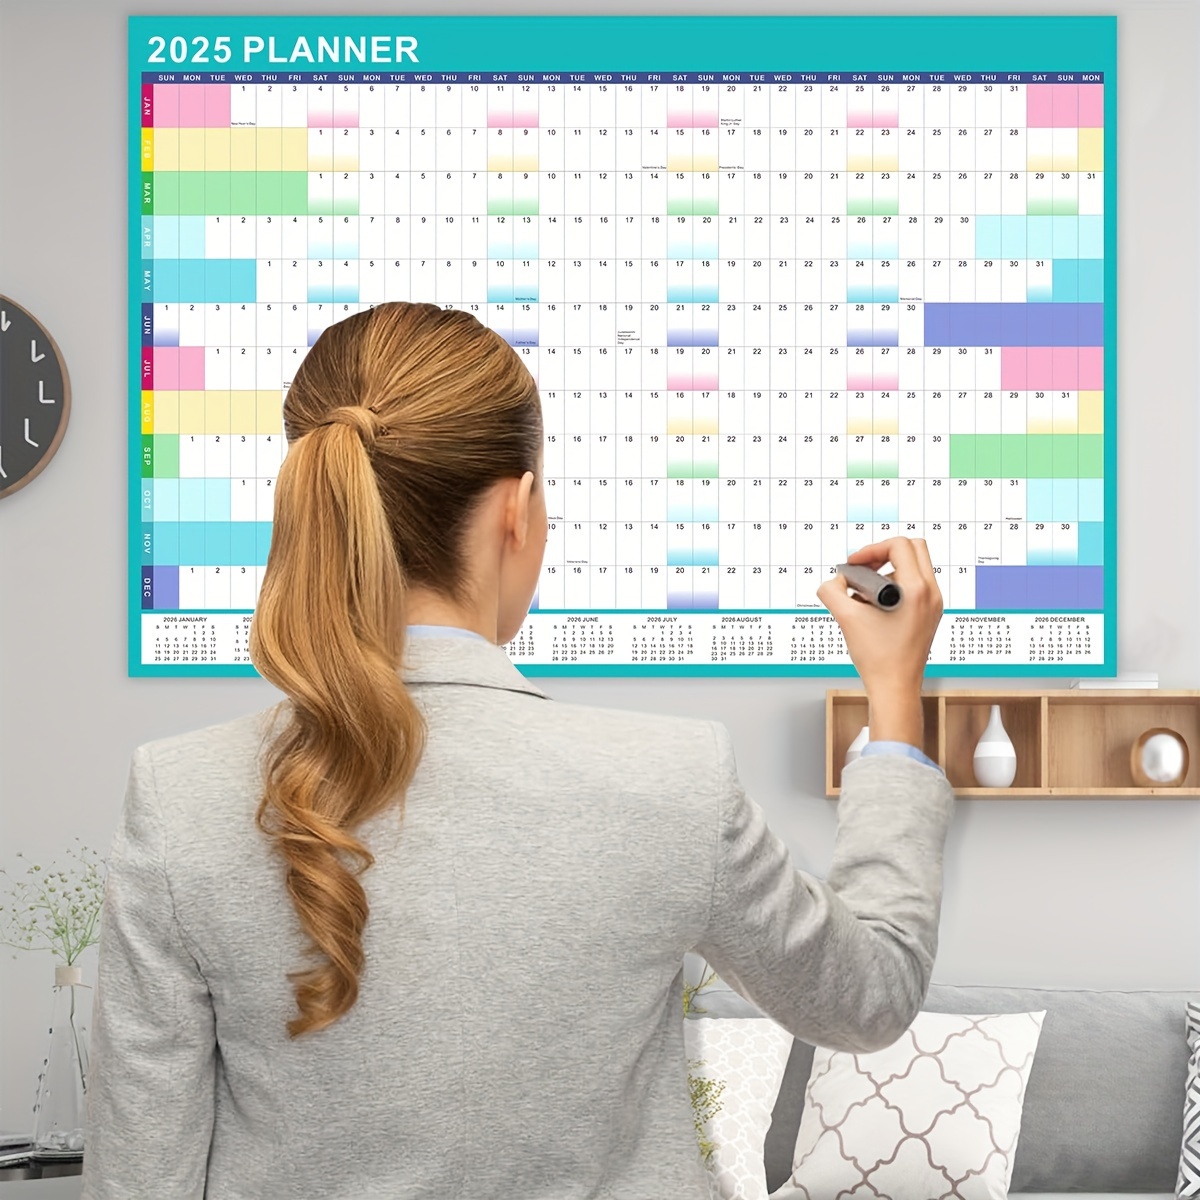 

2025 Erasable Wall Calendar With Planner, Single-sided Pet Film, Writing Can Be Erased And Rewritten, Comes With 2 Erasable Pens And A Double-sided Tape (10 Pieces) 3-piece Set, Size: 35.4x23.6